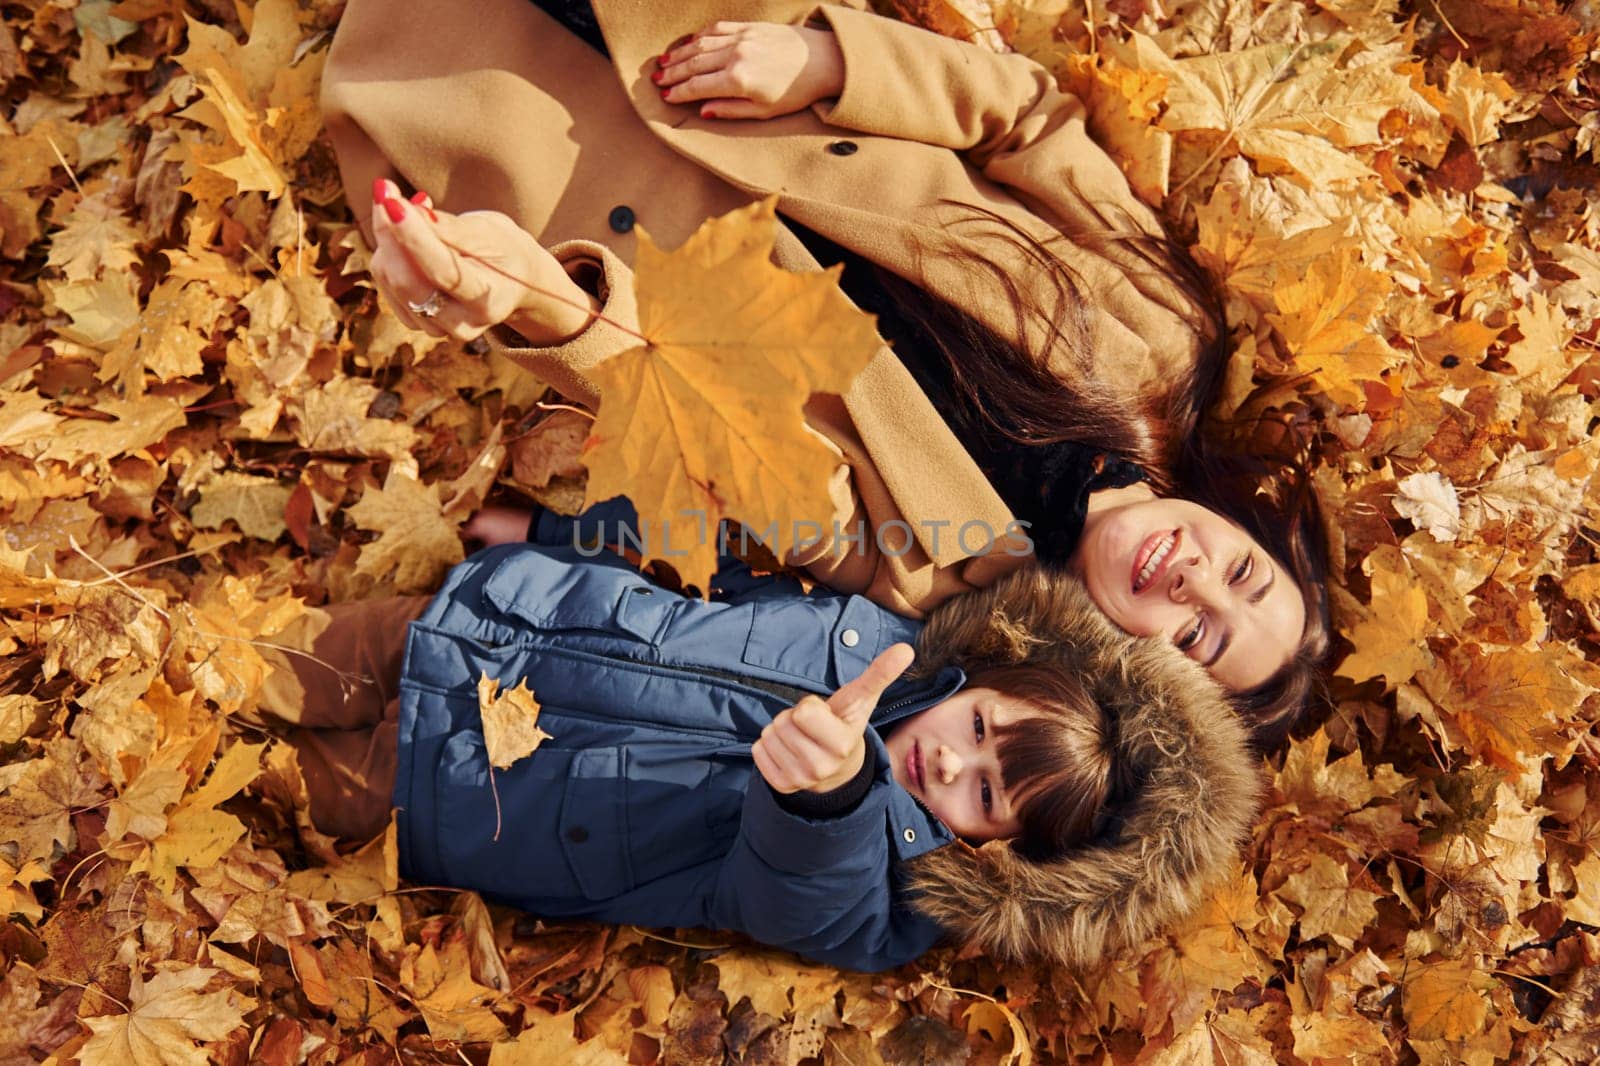 Laying down on the leaves. Mother with her son is having fun outdoors in the autumn forest.